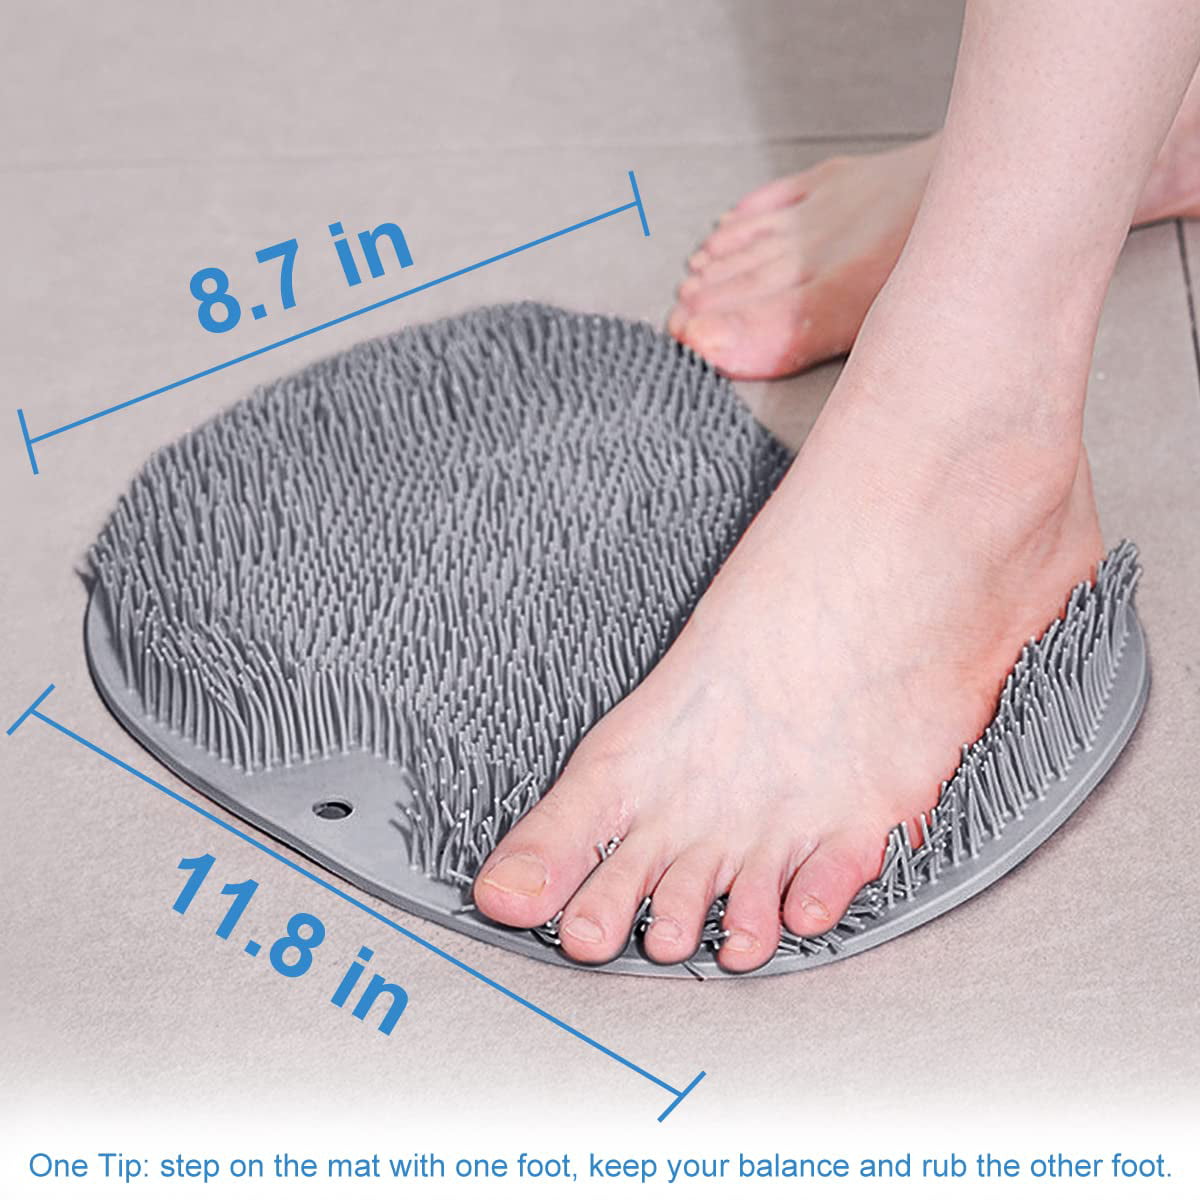 Shower Foot Scrubber by Love, Lori - Foot Scrubbers for Use in Shower